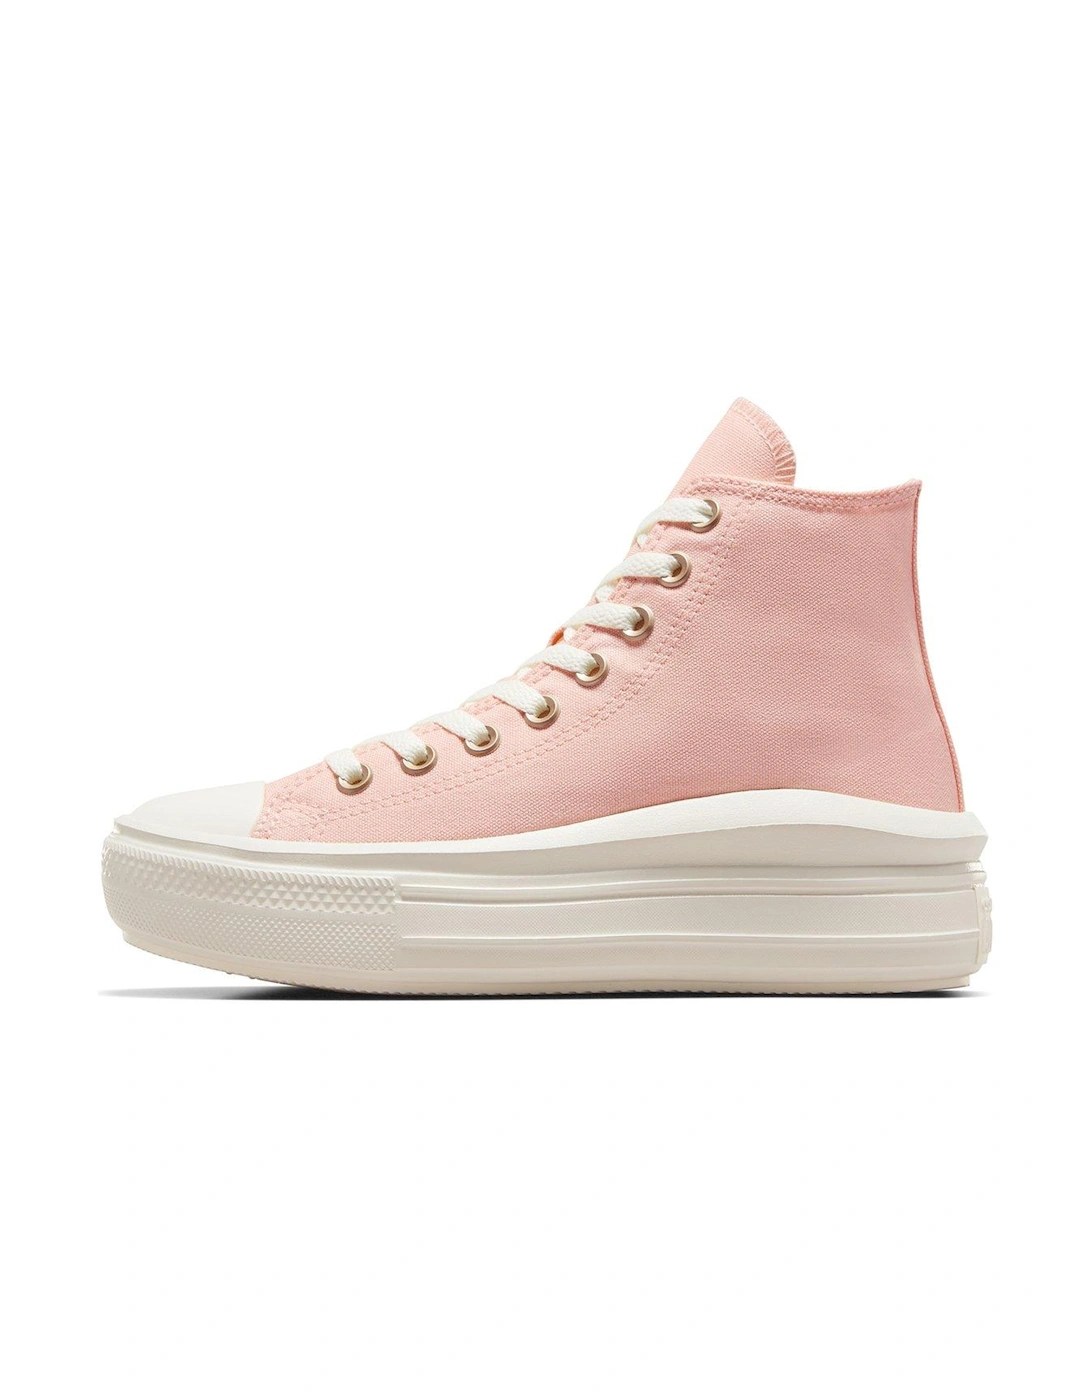 Womens Move Crafted Color High Tops Trainers - Peach/White